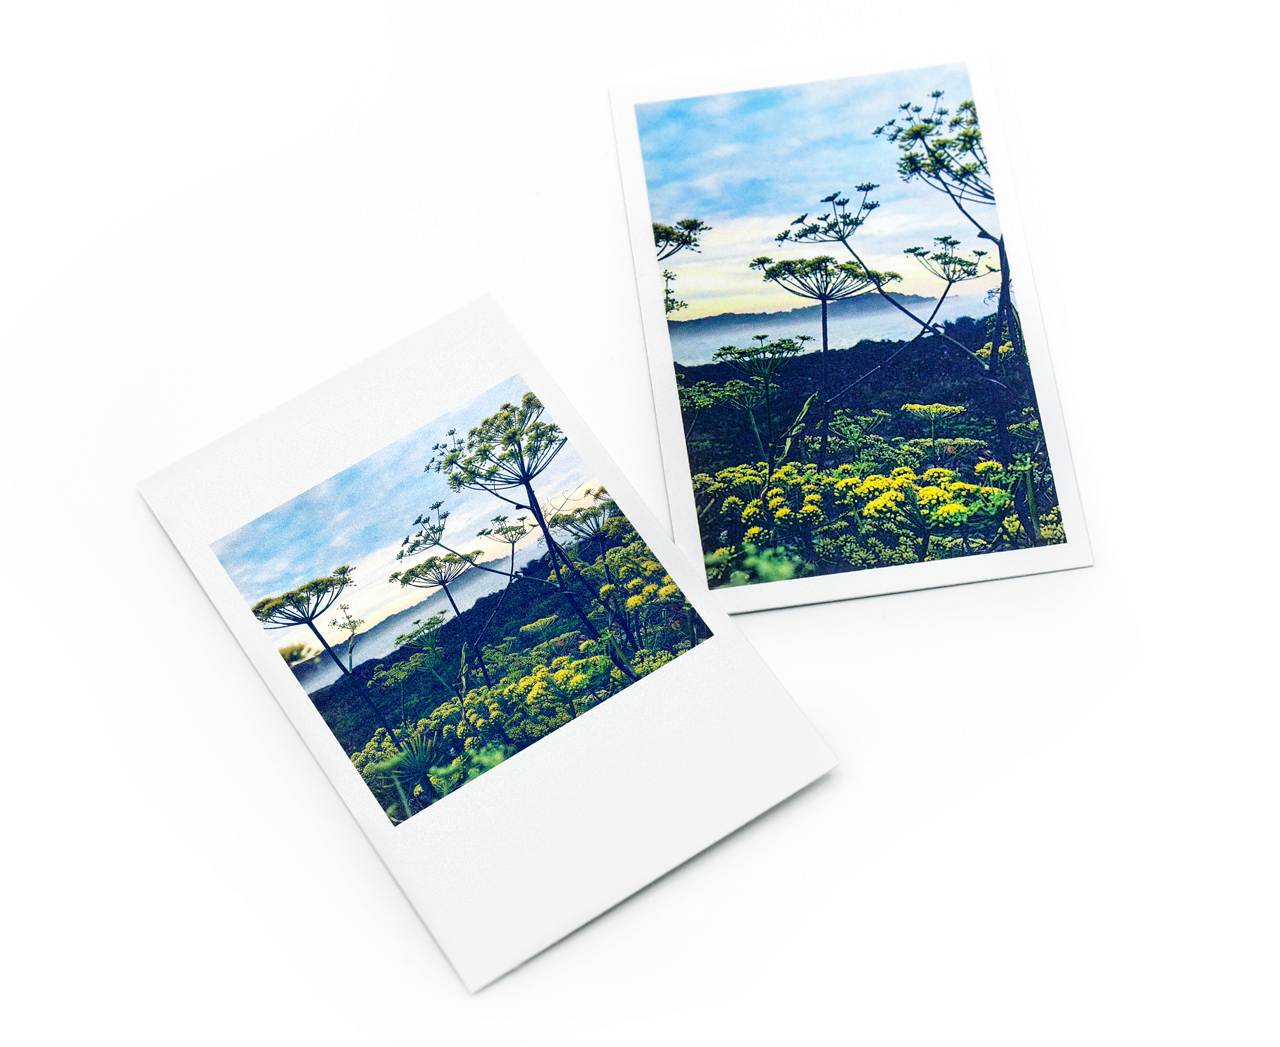 Mini Photo Prints Small But Mighty Our Mini Photo Prints Are A Simple And Classy Way To Showcase Your Digital Photos As Pocket Sized Prints Social Print Studio